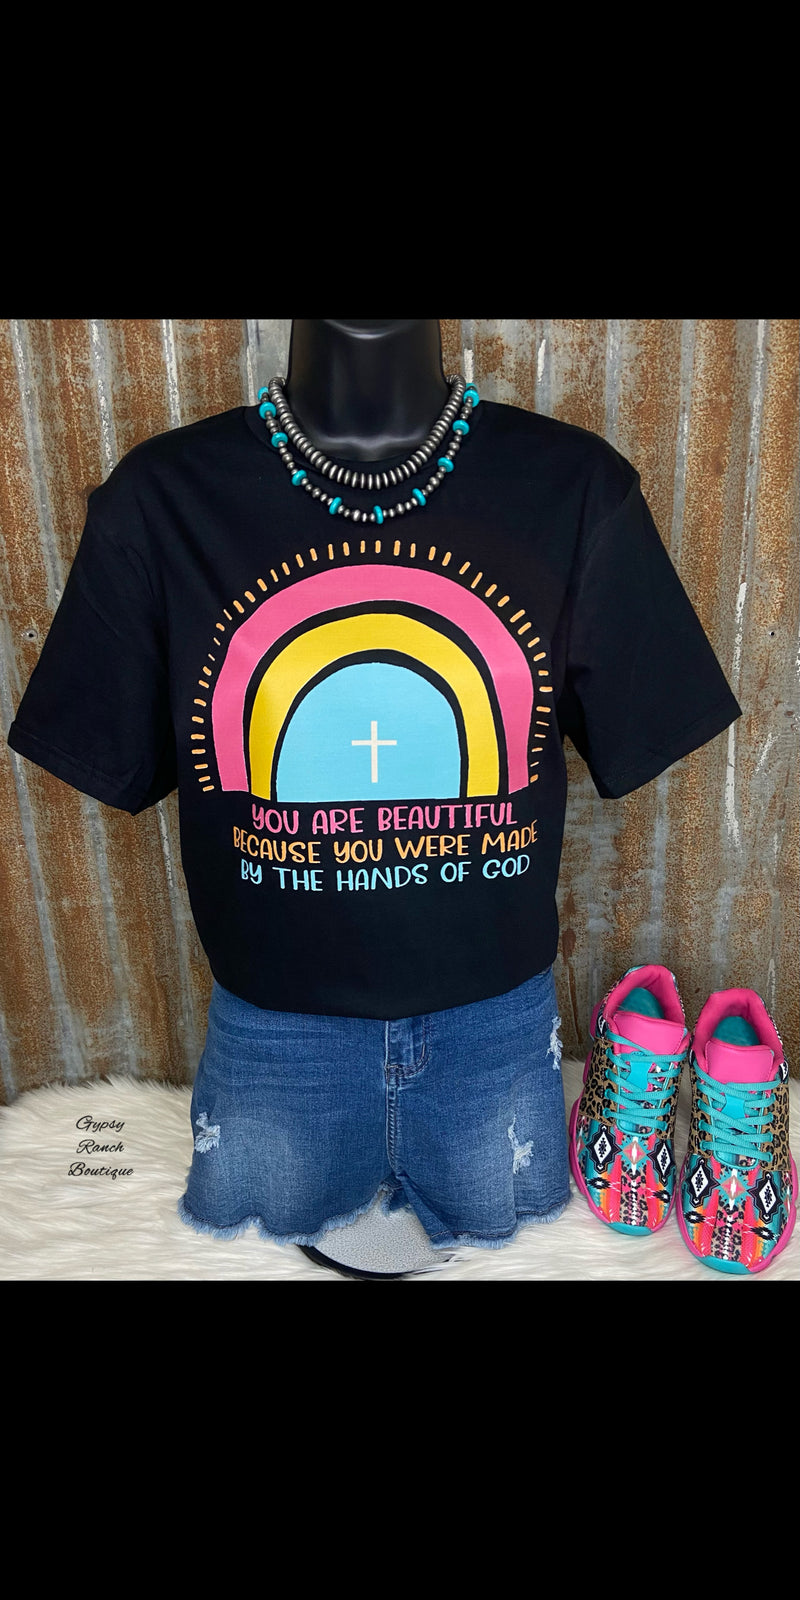 Because you were Made by the Hands of God Top - Also in Plus Size